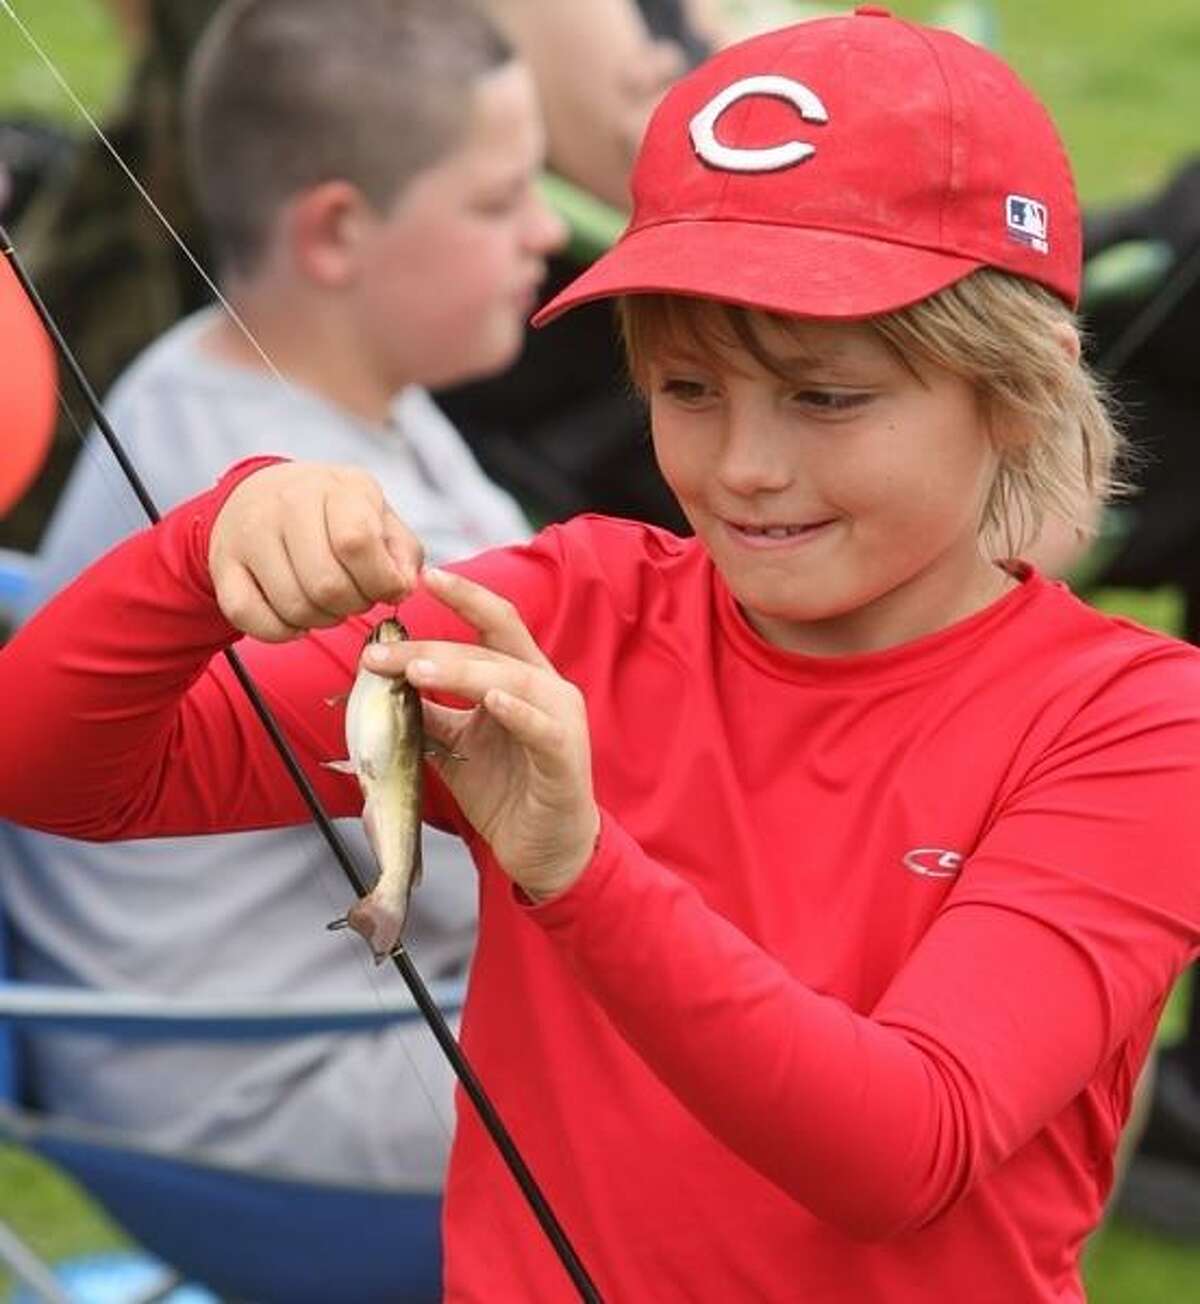 PHOTO BY JOHN HAEGER @ ONEIDAPHOTO ON TWITTER/ONEIDA DAILY DISPATCH Shane Plack ,10, of Canastota works to take a fish off the hook during the annual fishing derby in Sherrill on Saturday, May 18, 2013.